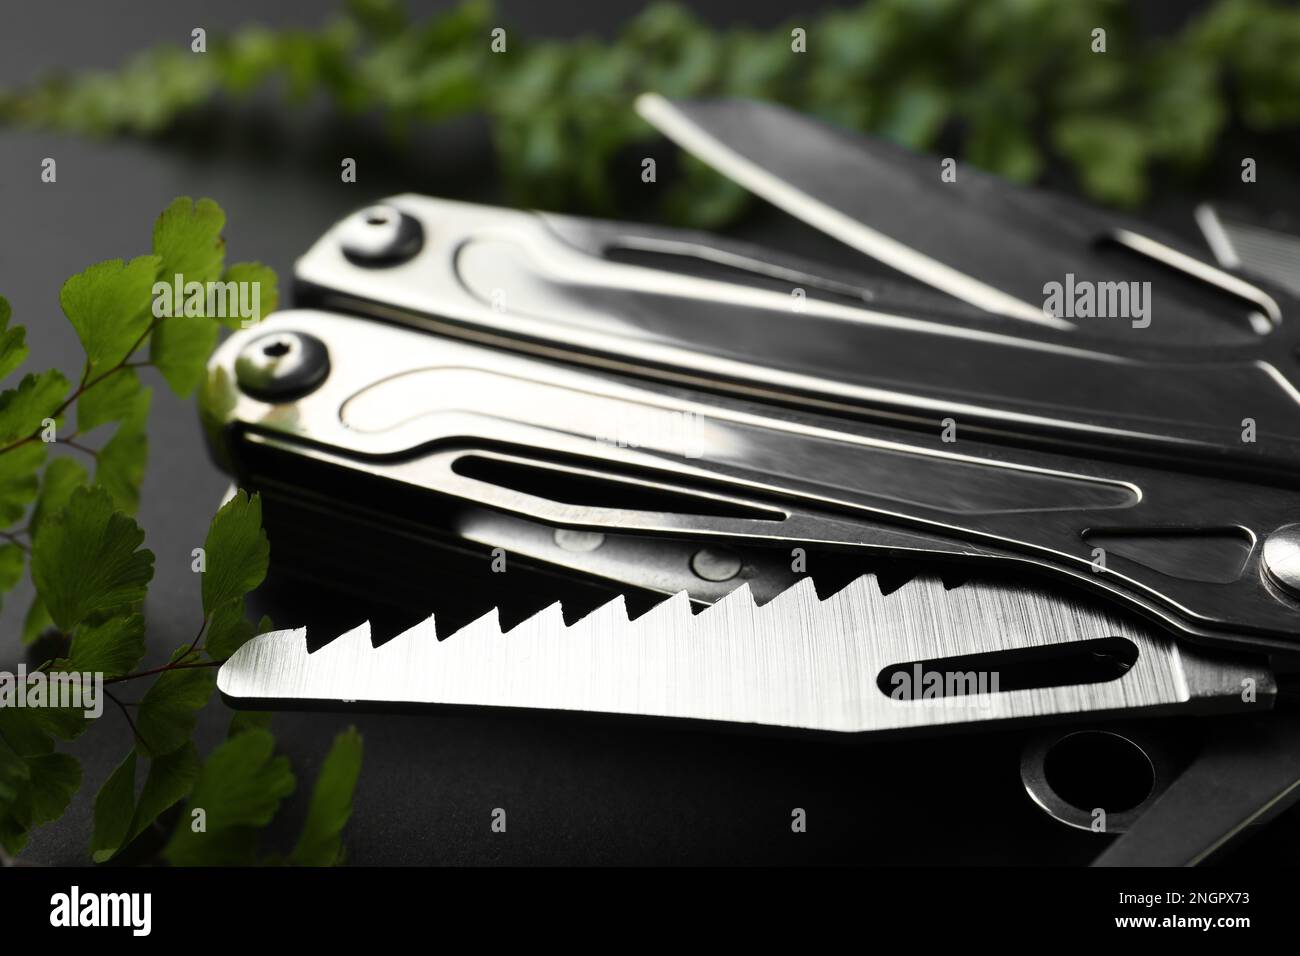 https://c8.alamy.com/comp/2NGPX73/compact-portable-metallic-multitool-and-green-leaves-on-black-background-closeup-2NGPX73.jpg